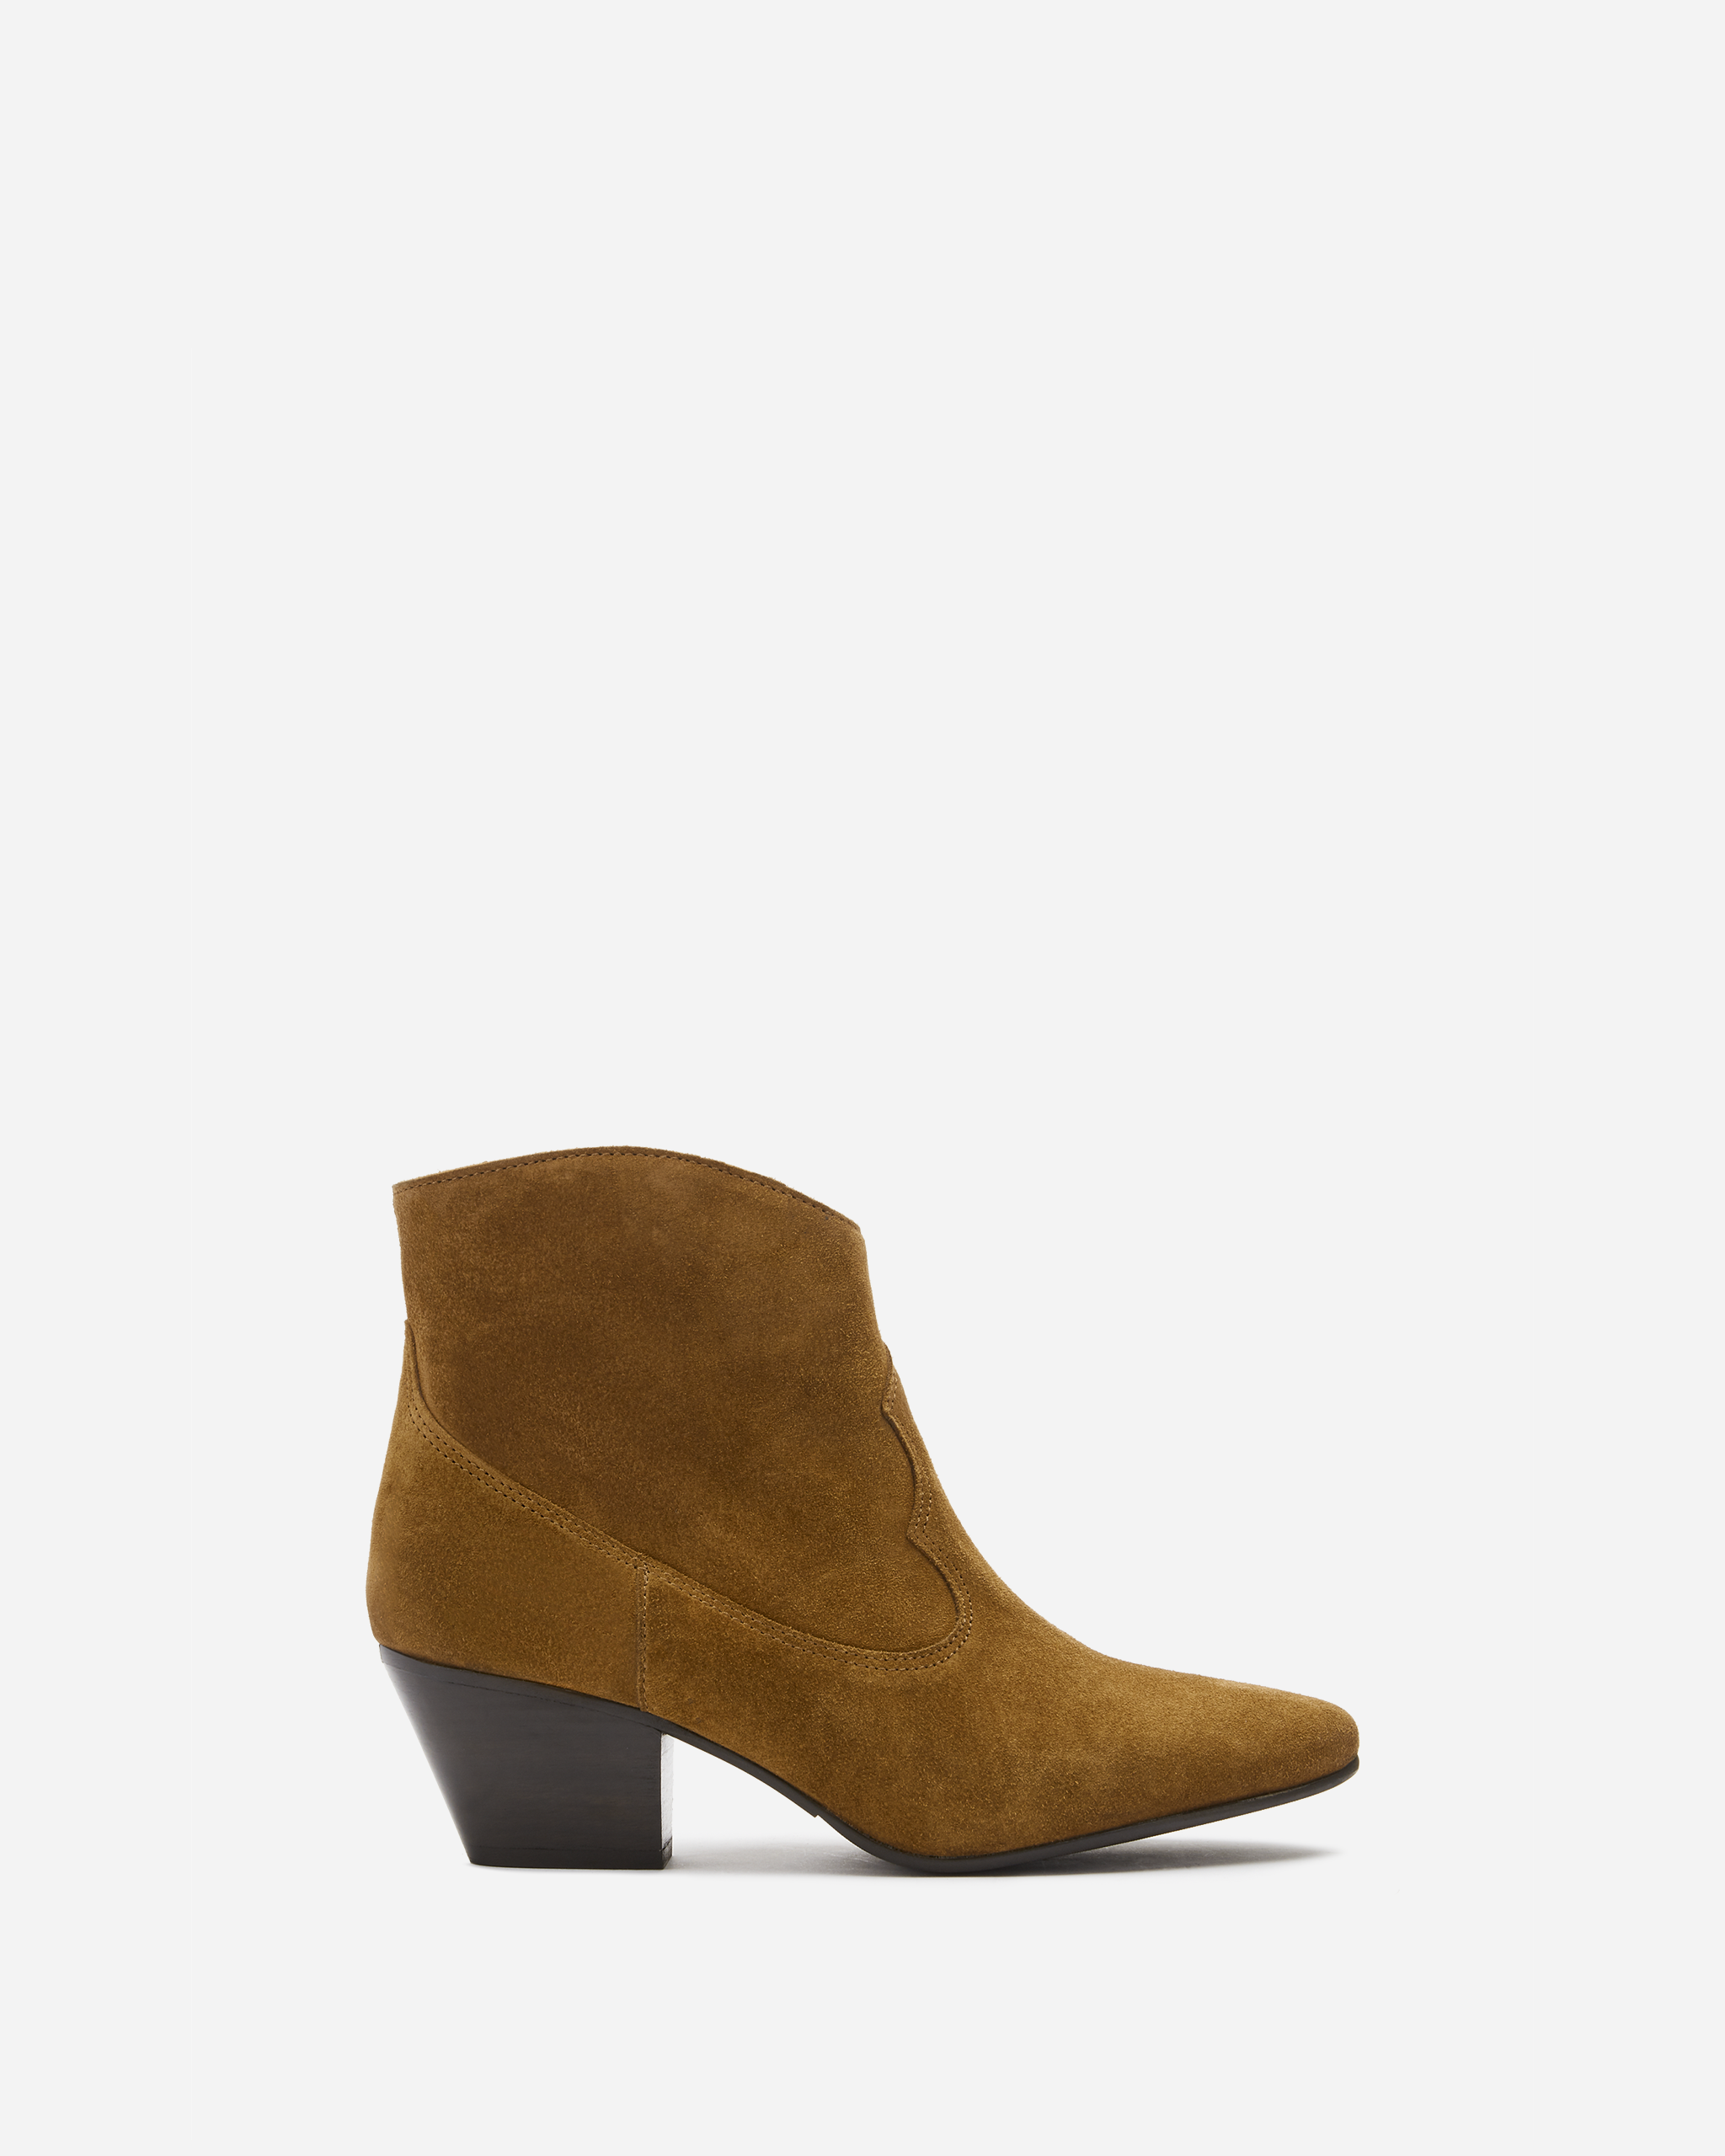 cowboy western style tan suede heeled ankle boot